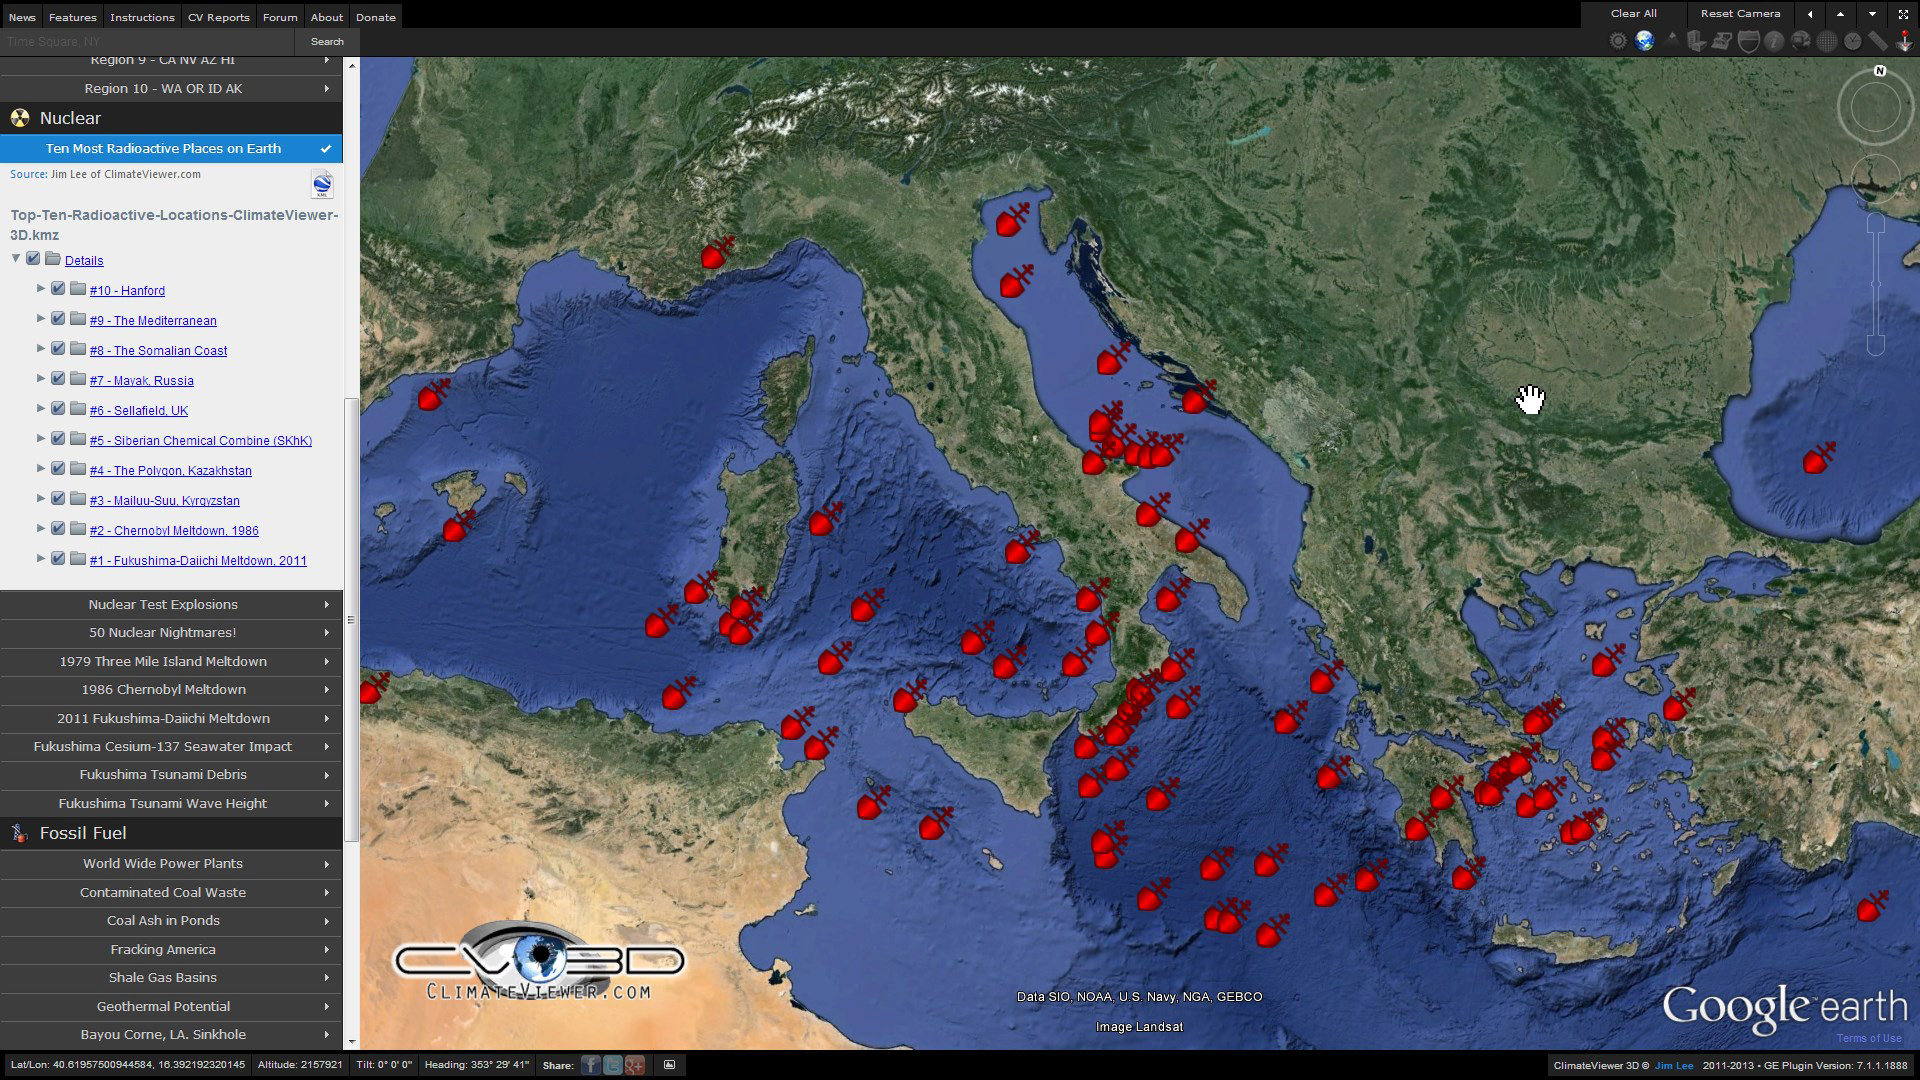 sinkings and incidents in the Mediterranean Sea, involving ships which are suspected of having carried toxic and radioactive waste on ClimateViewer 3D